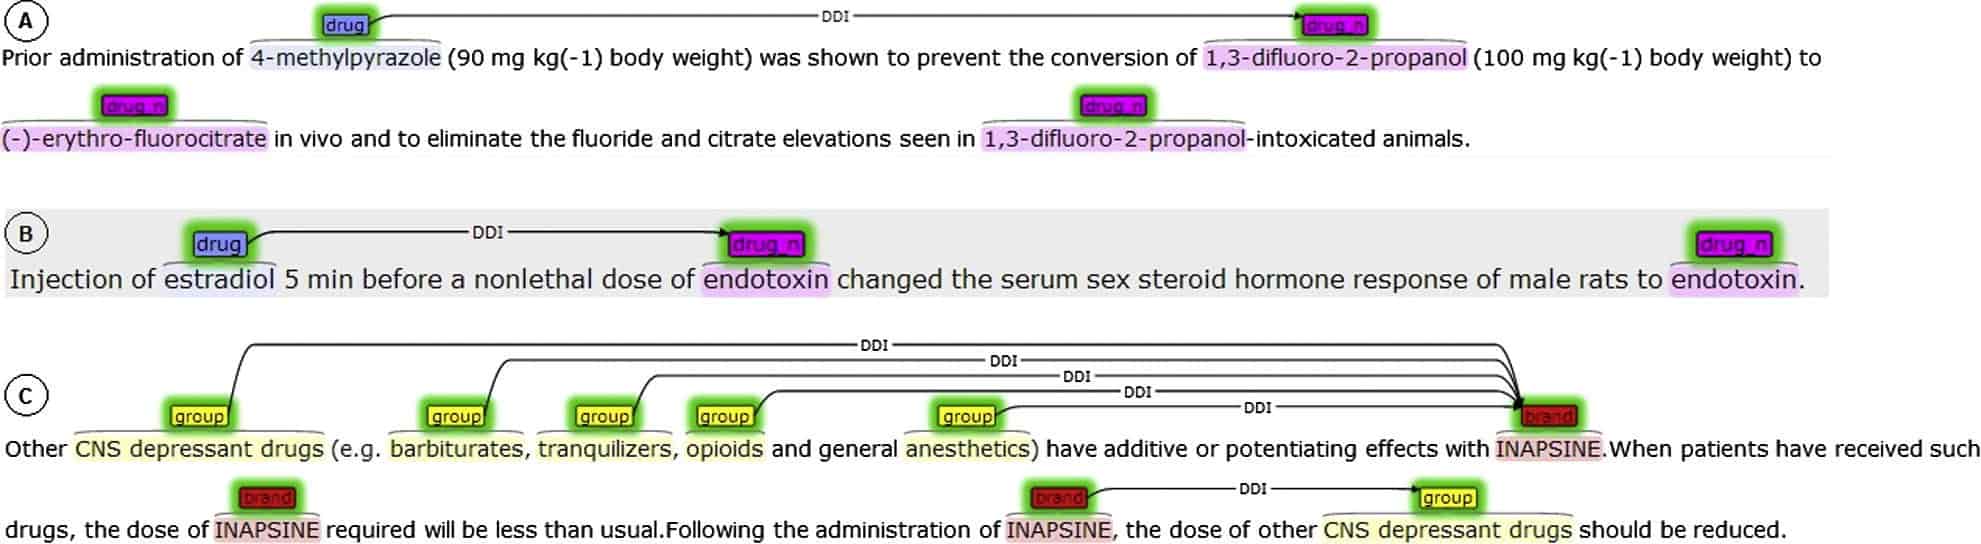 A classic use of AI in pharma: Some annotated texts in the DDI corpus used in the DDIExtraction Challenge, showing tagged drug-drug interactions which can be used to train machine learning algorithms. Image source: Segura-Bedmar et al (2014)